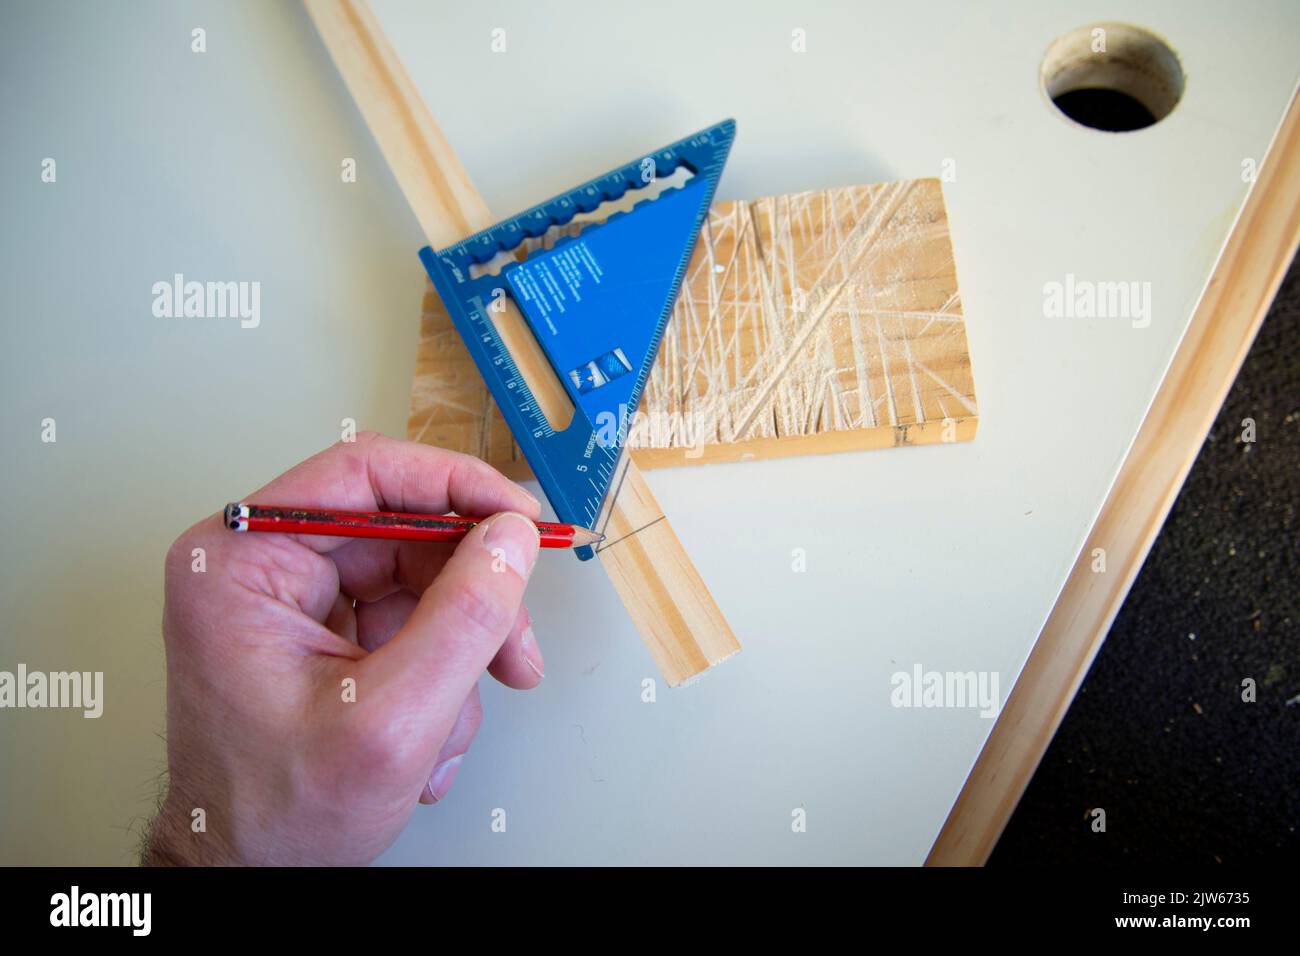 DIY Construction with a Rafter Square Stock Photo